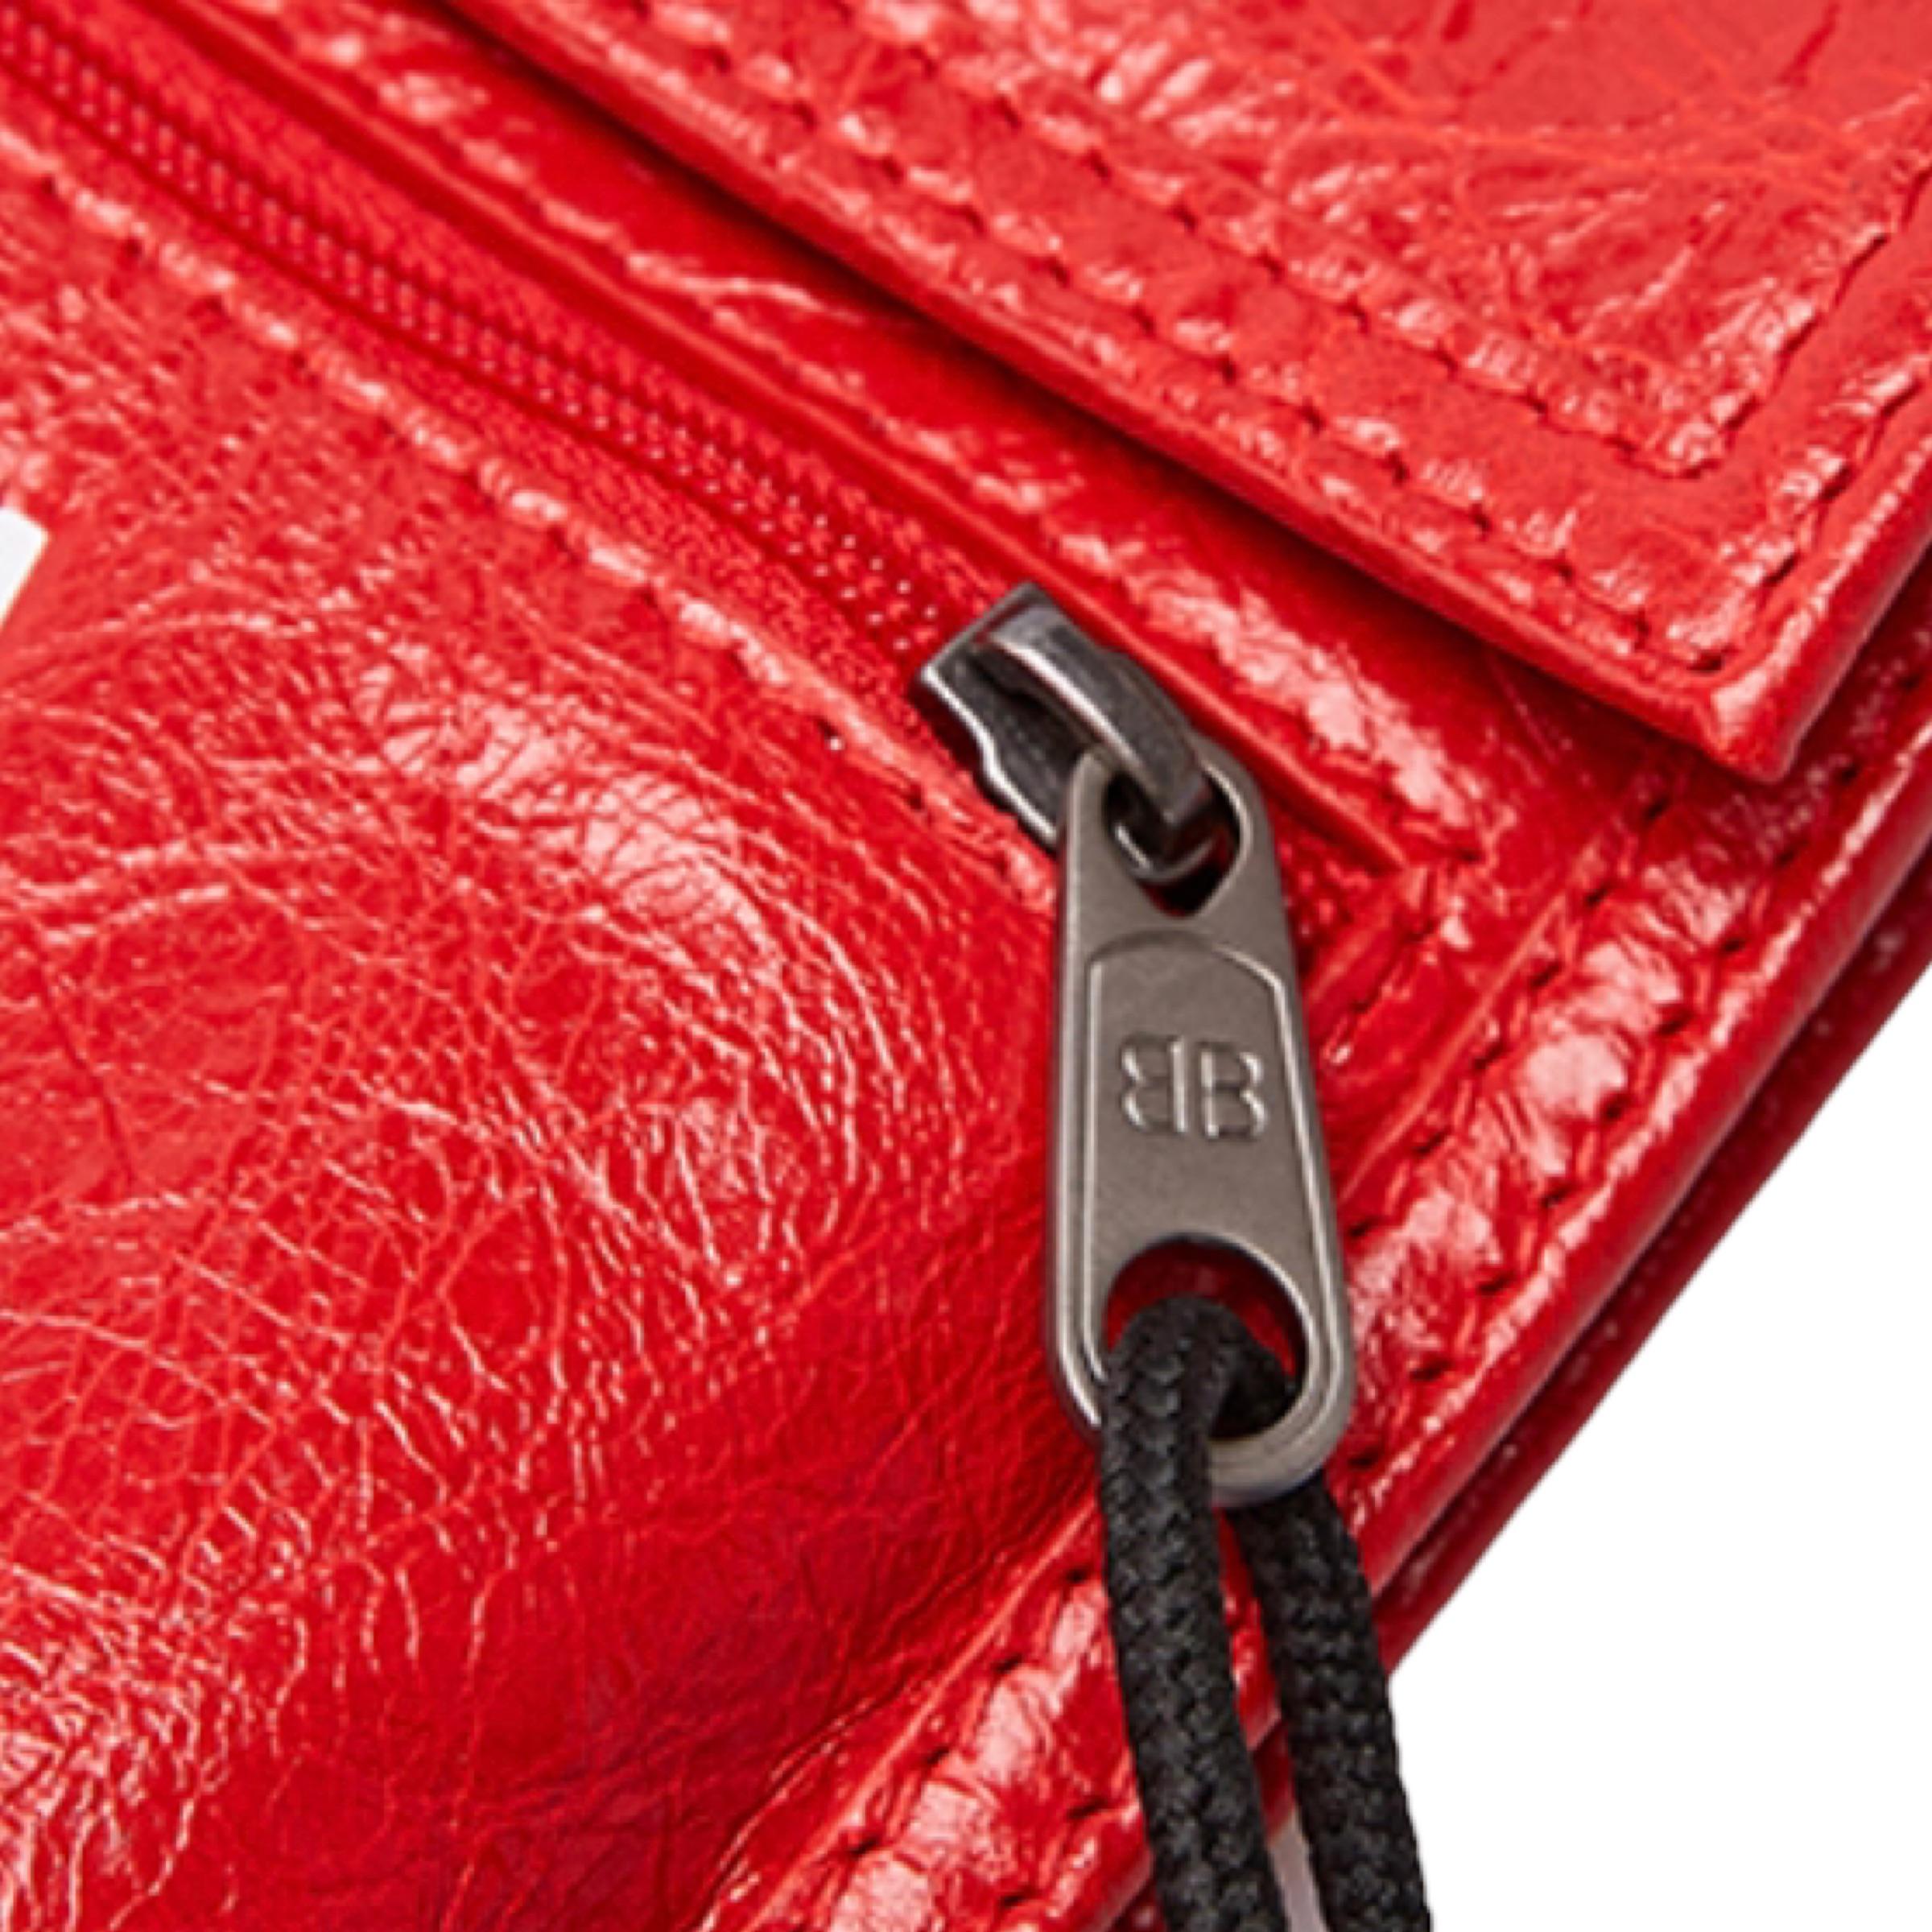 NEW Balenciaga Red Explorer Cracked Leather Pouch Crossbody Bag For Sale 9